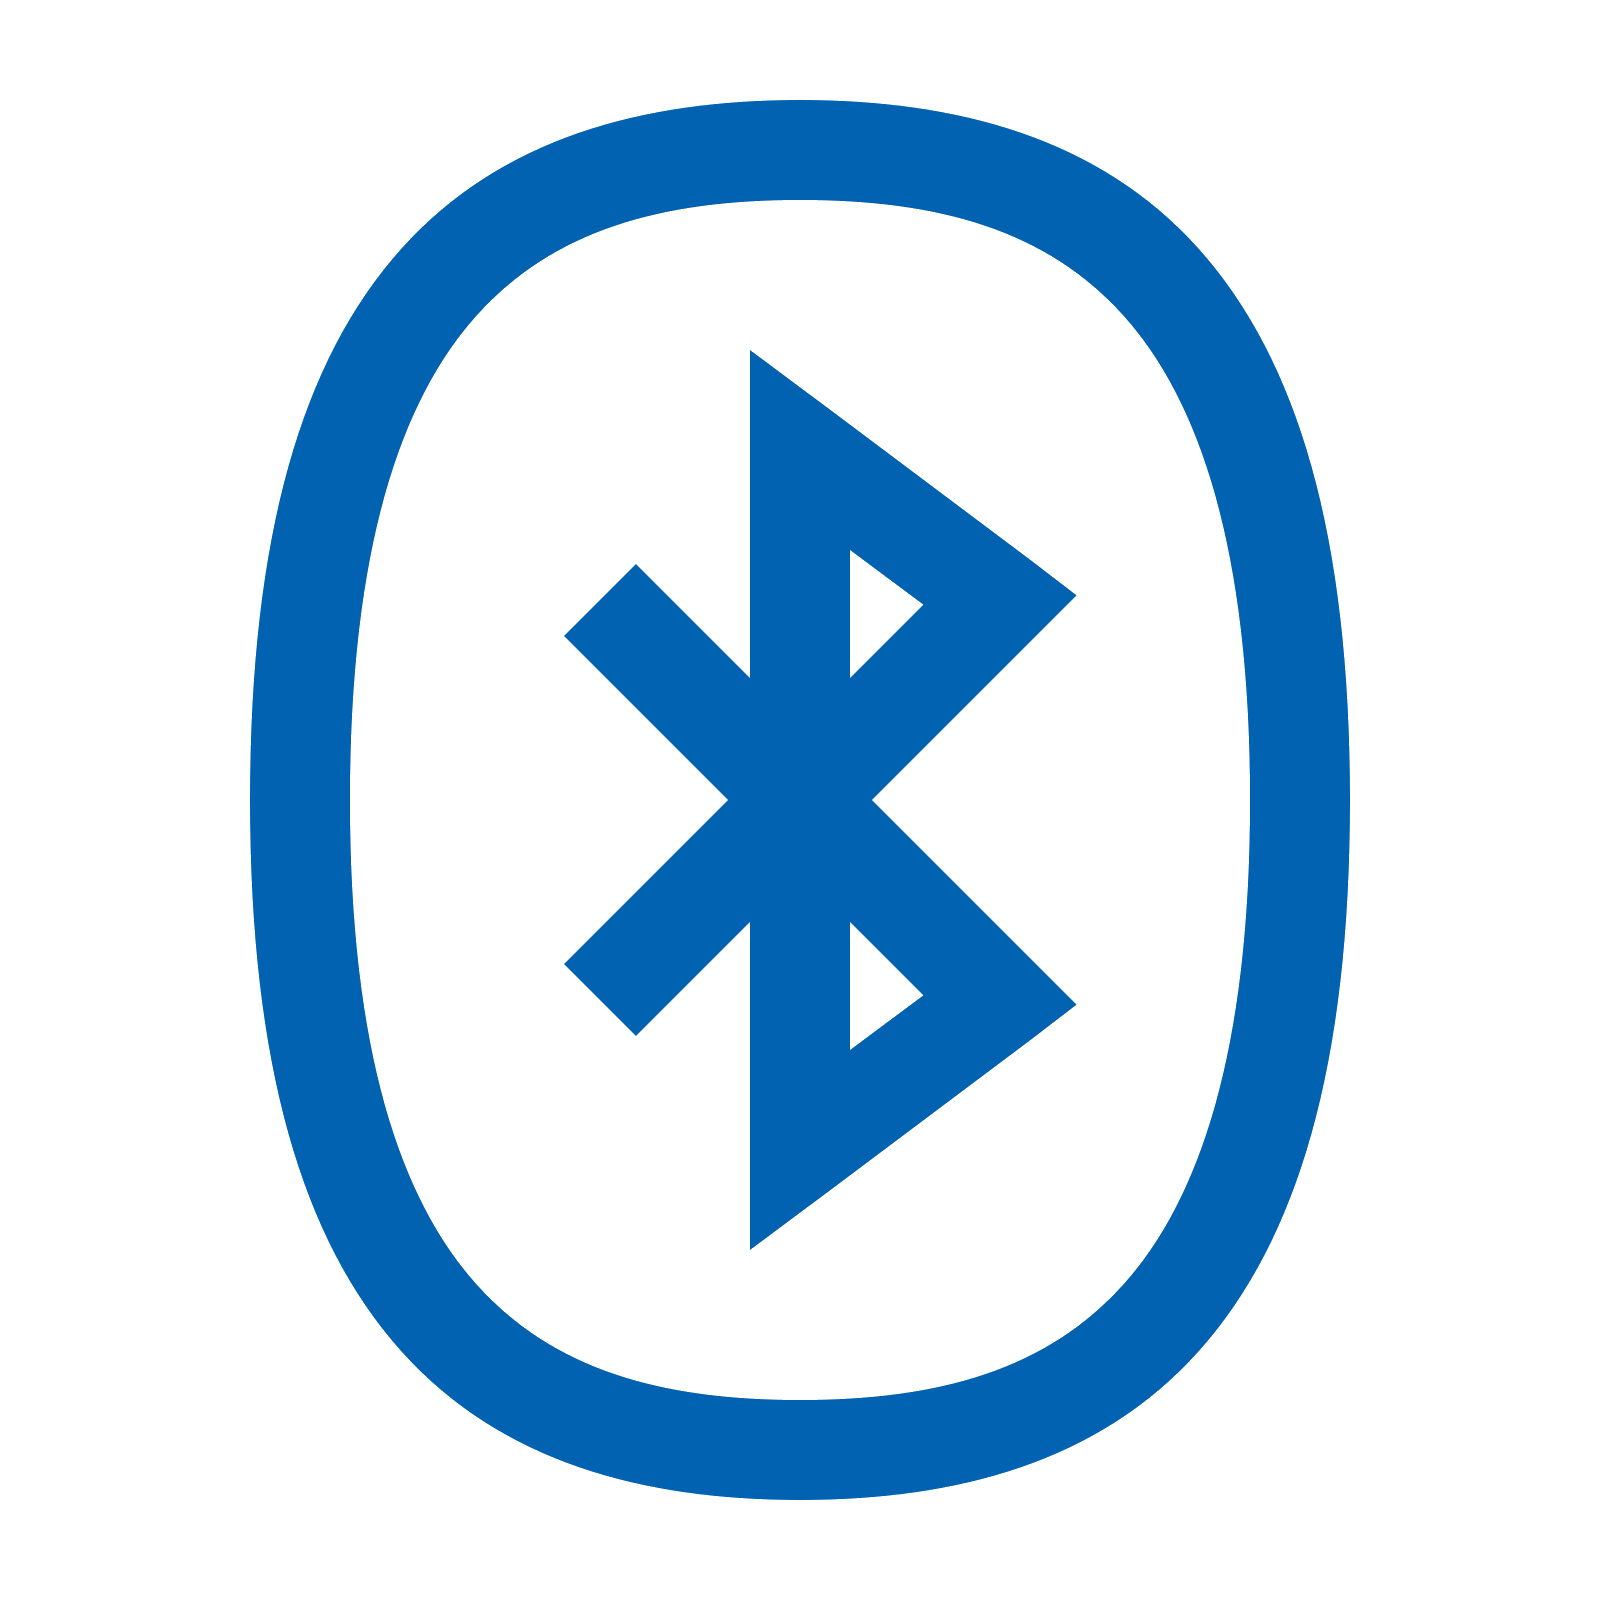 Bluetooth PNG Clipart